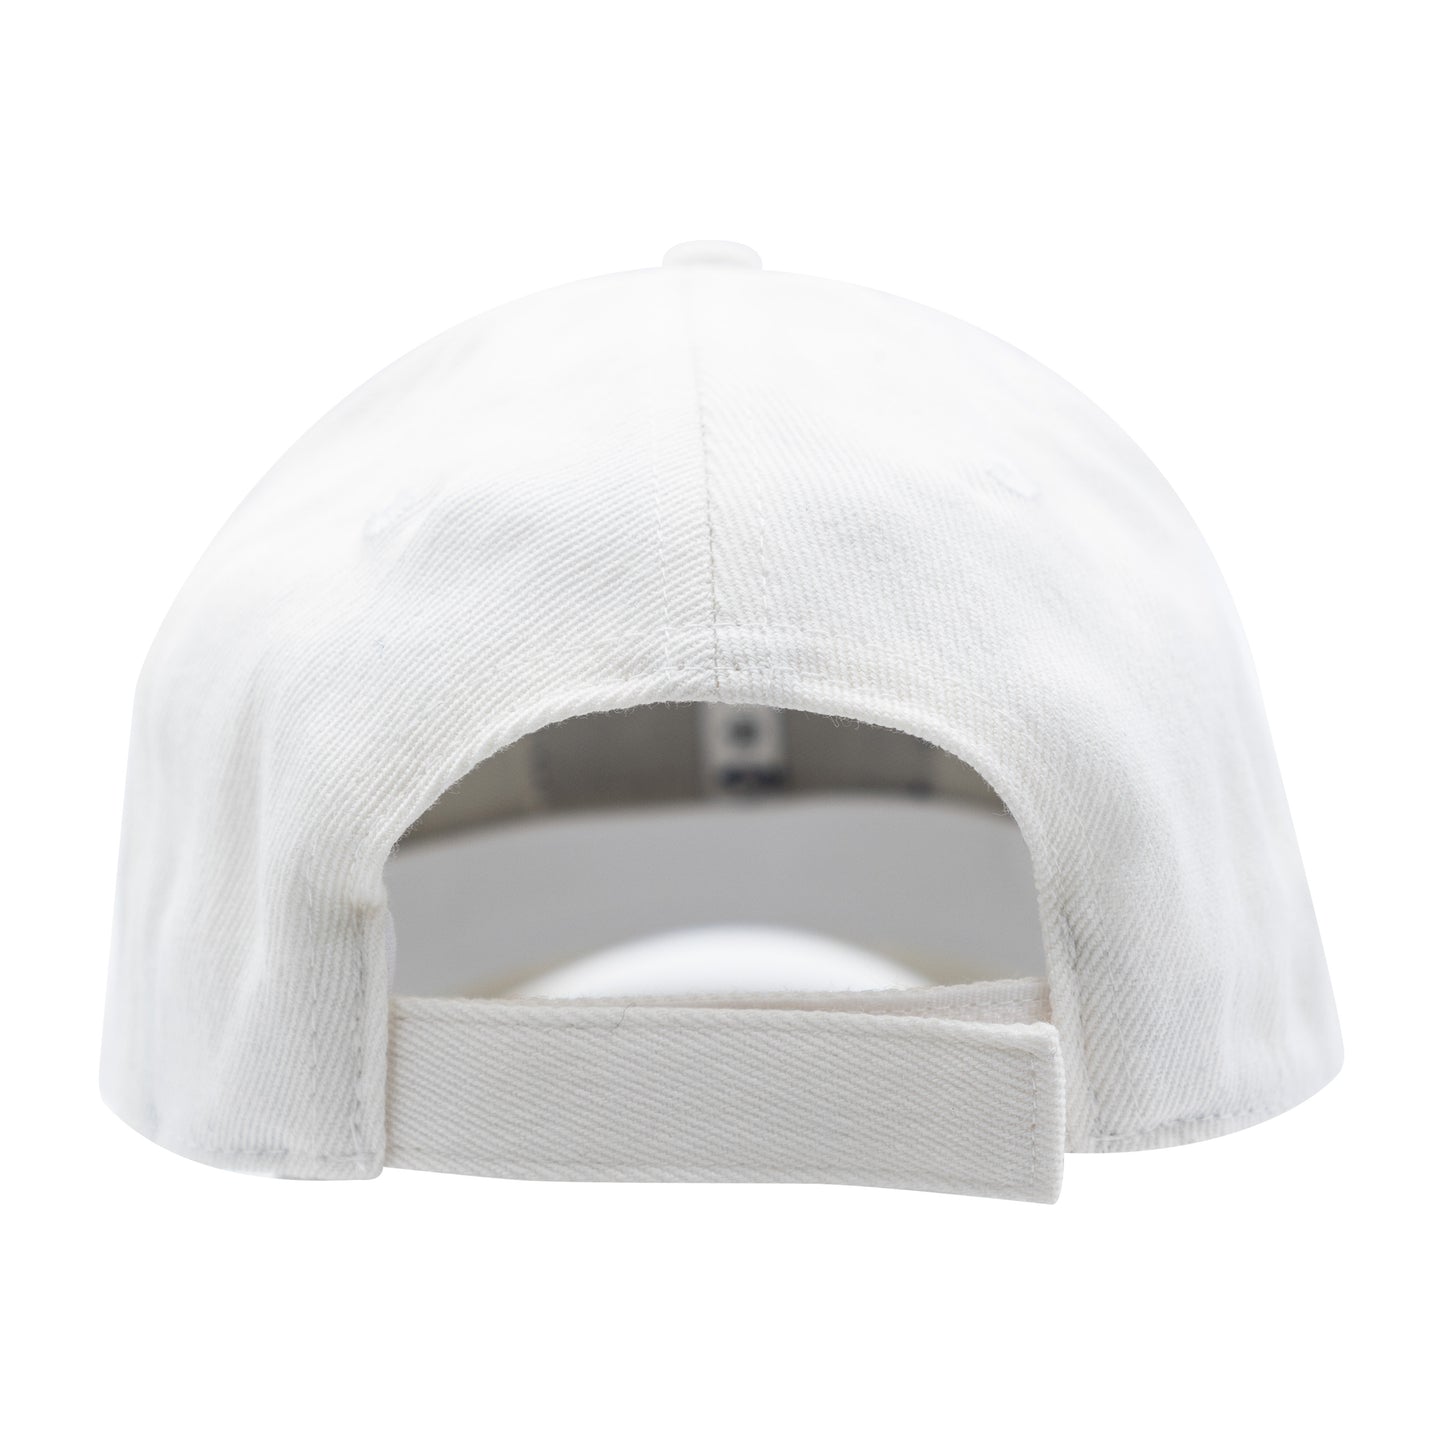 No Laying Up Navy Patch Hat | White Adjustable Flexfit